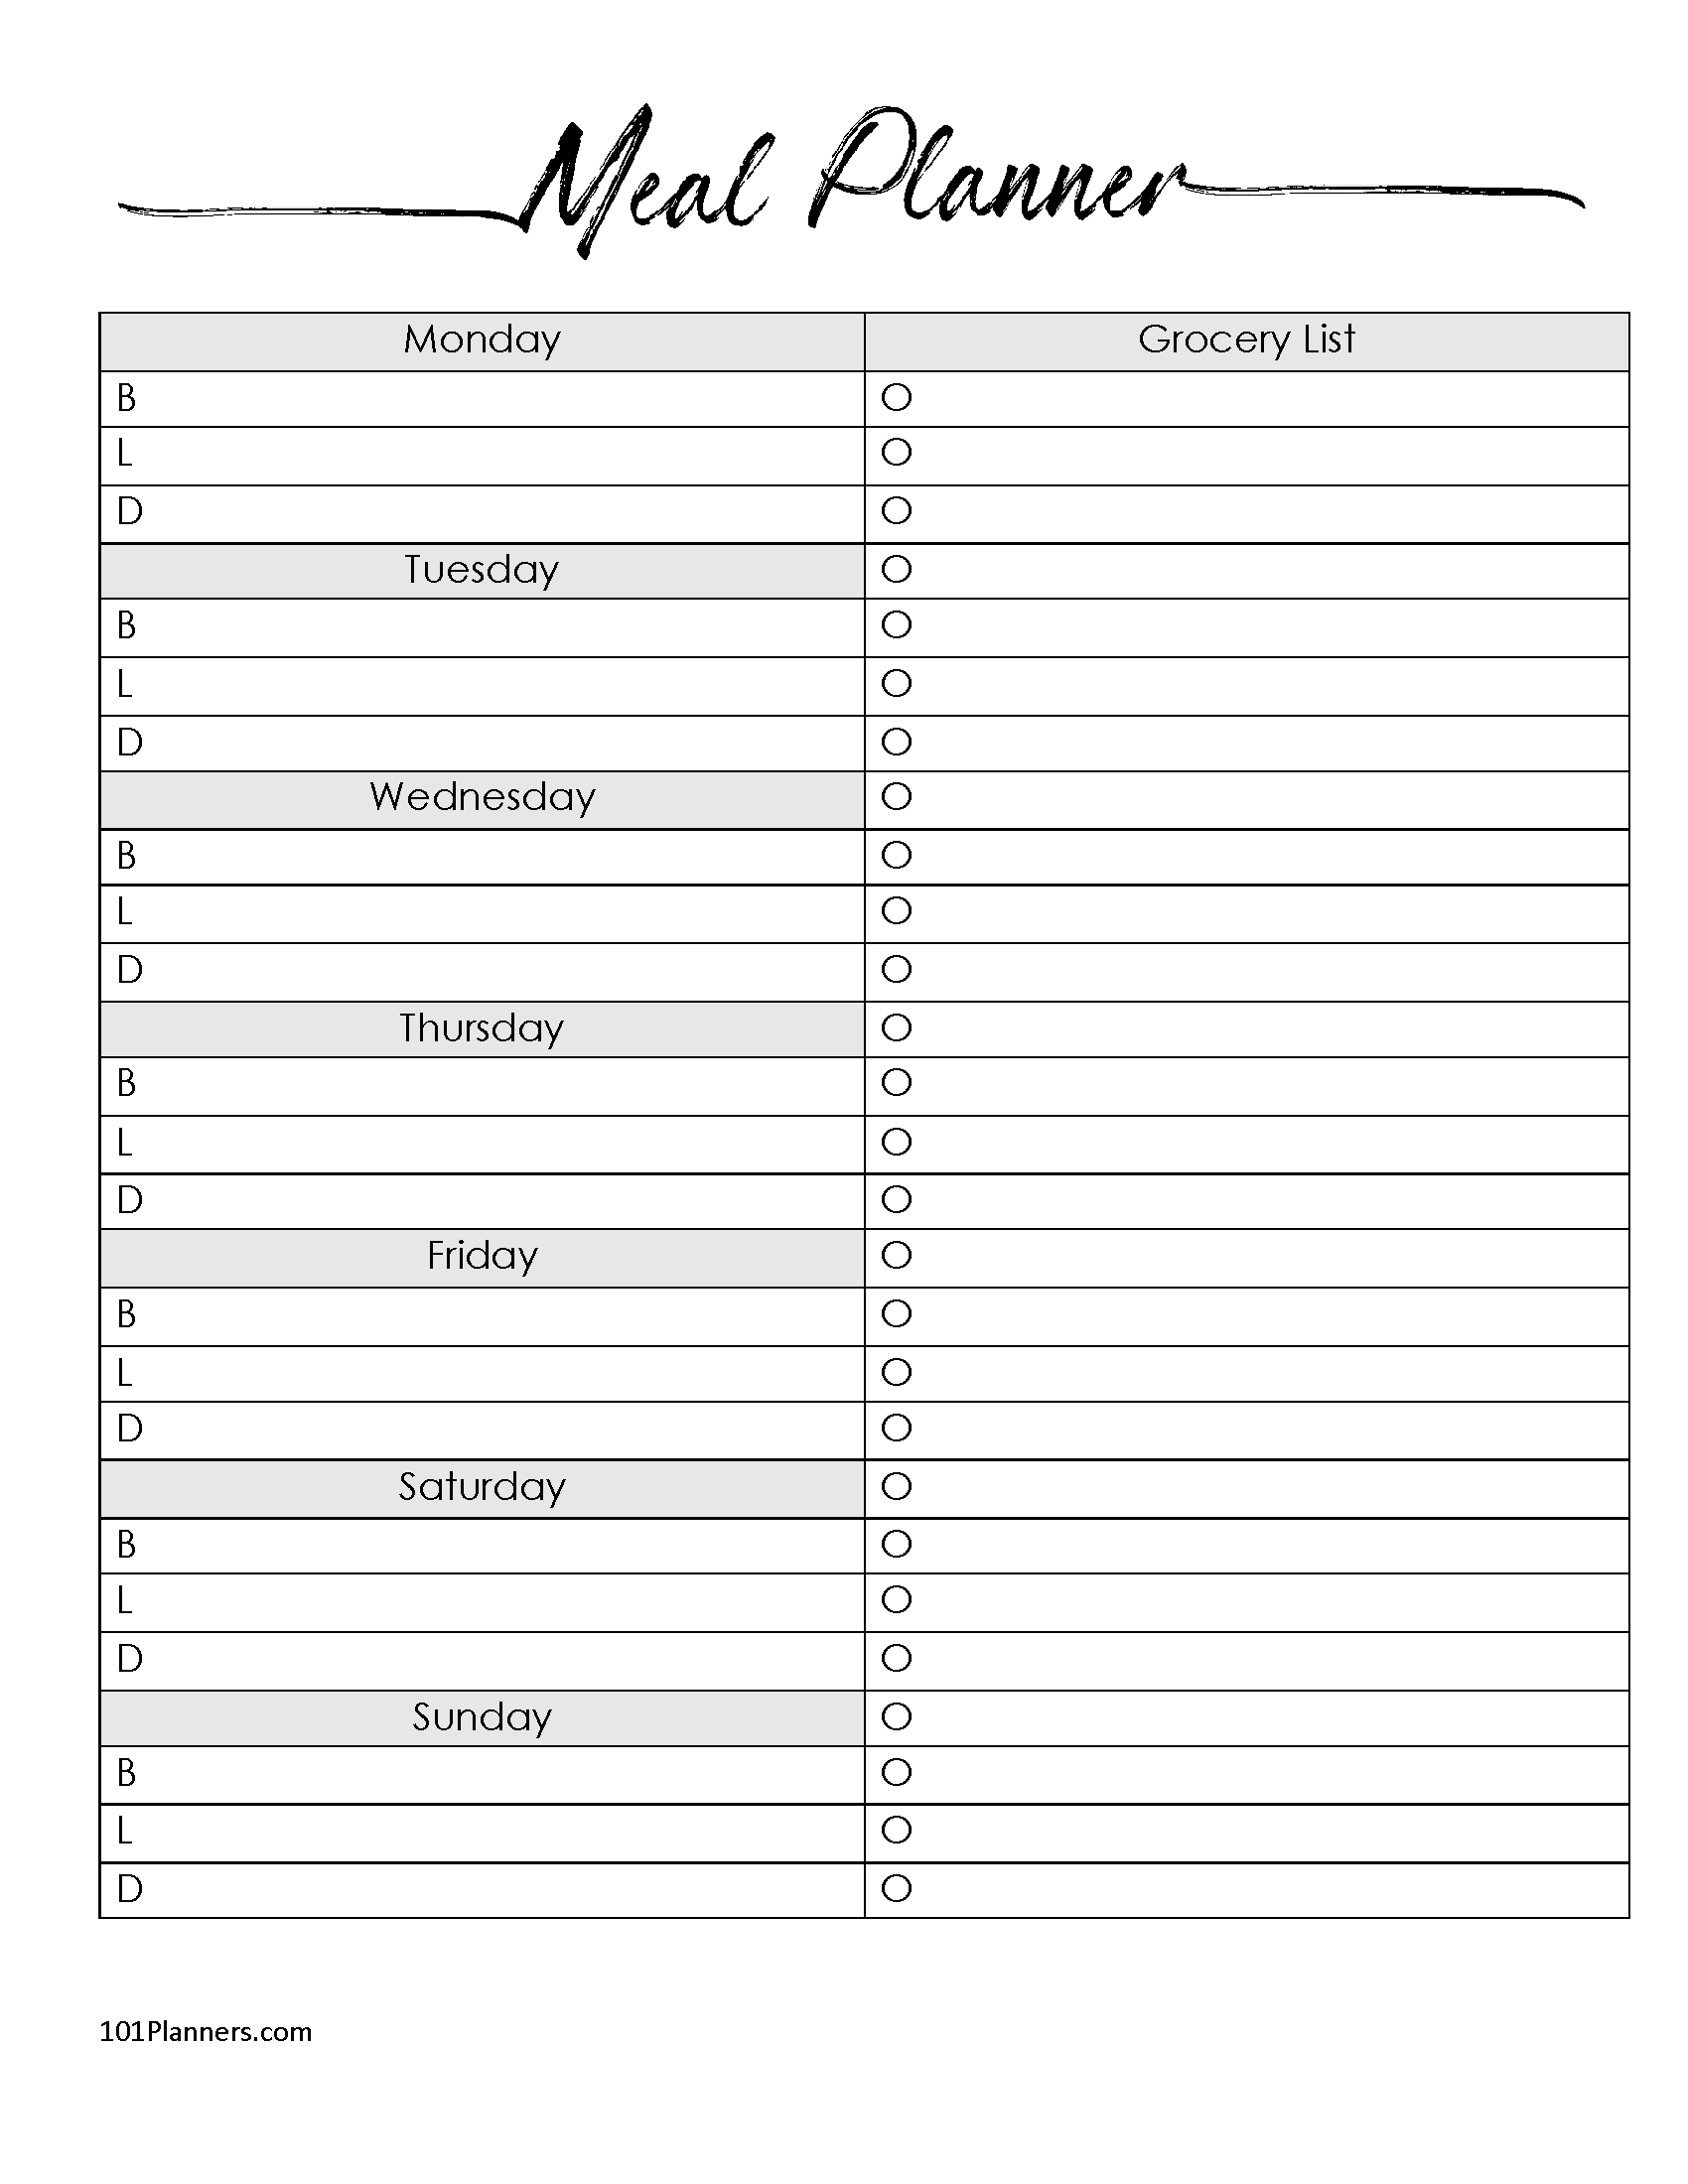 Free Printable Meal Plan Template | Customize Before You Print with regard to Free Printable Grocery List and Meal Planner